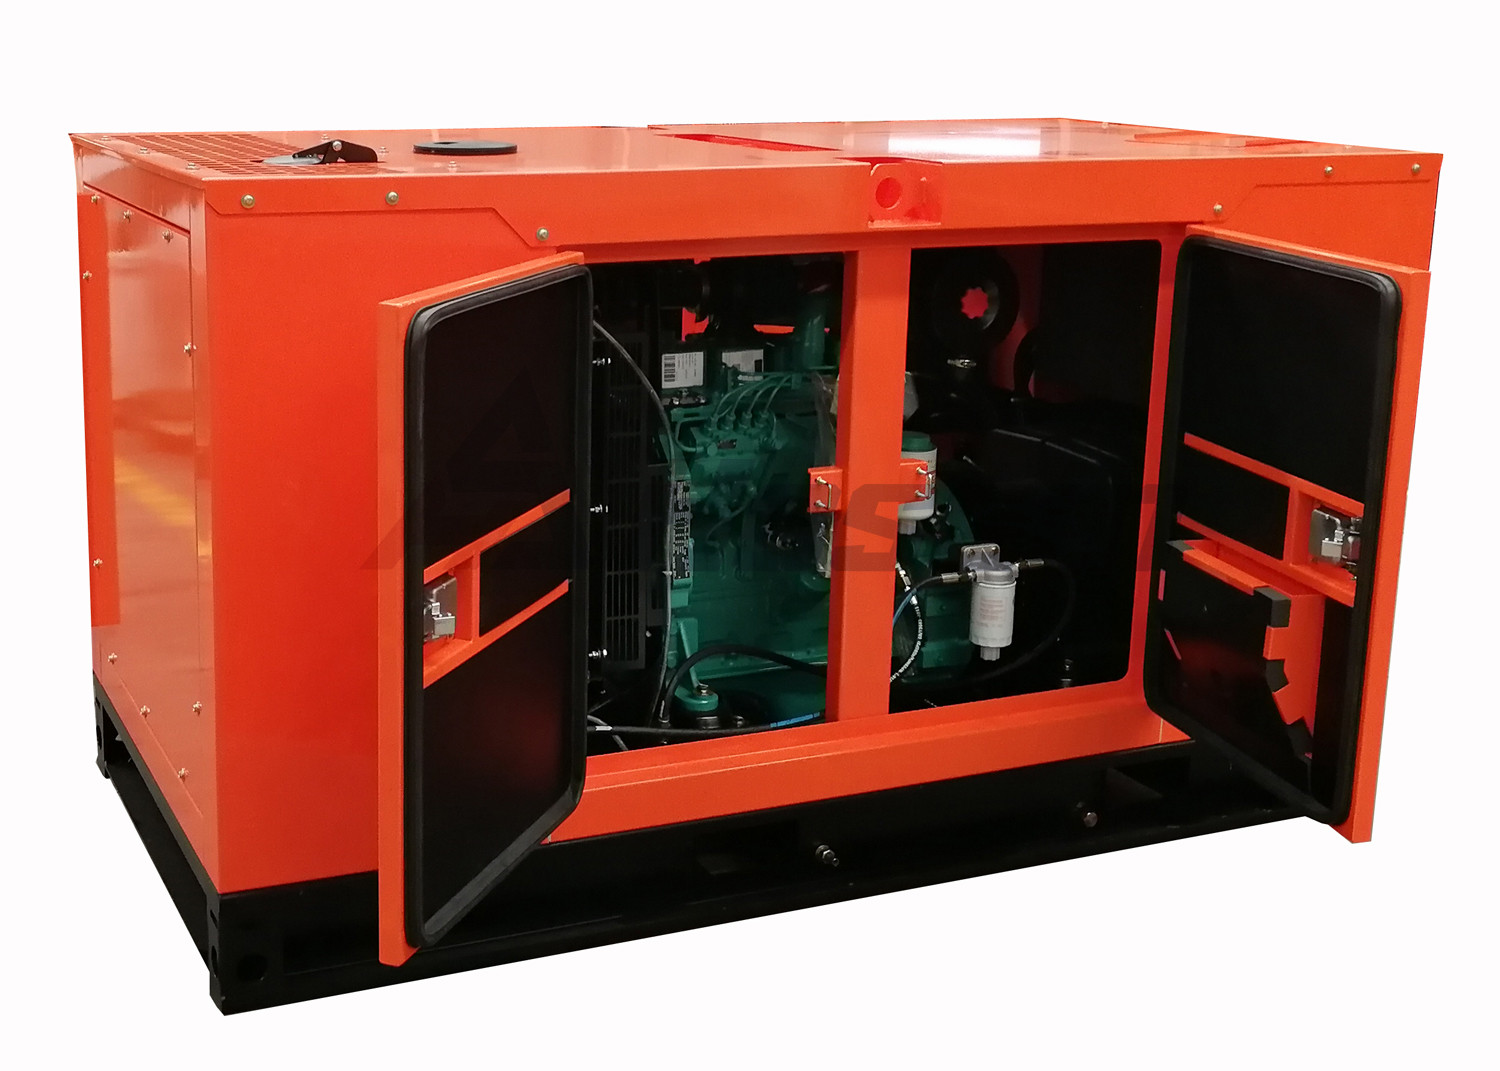 Standby 10kVA Diesel Generator Set with Quanchai Diesel Engine and Brushless Alternator